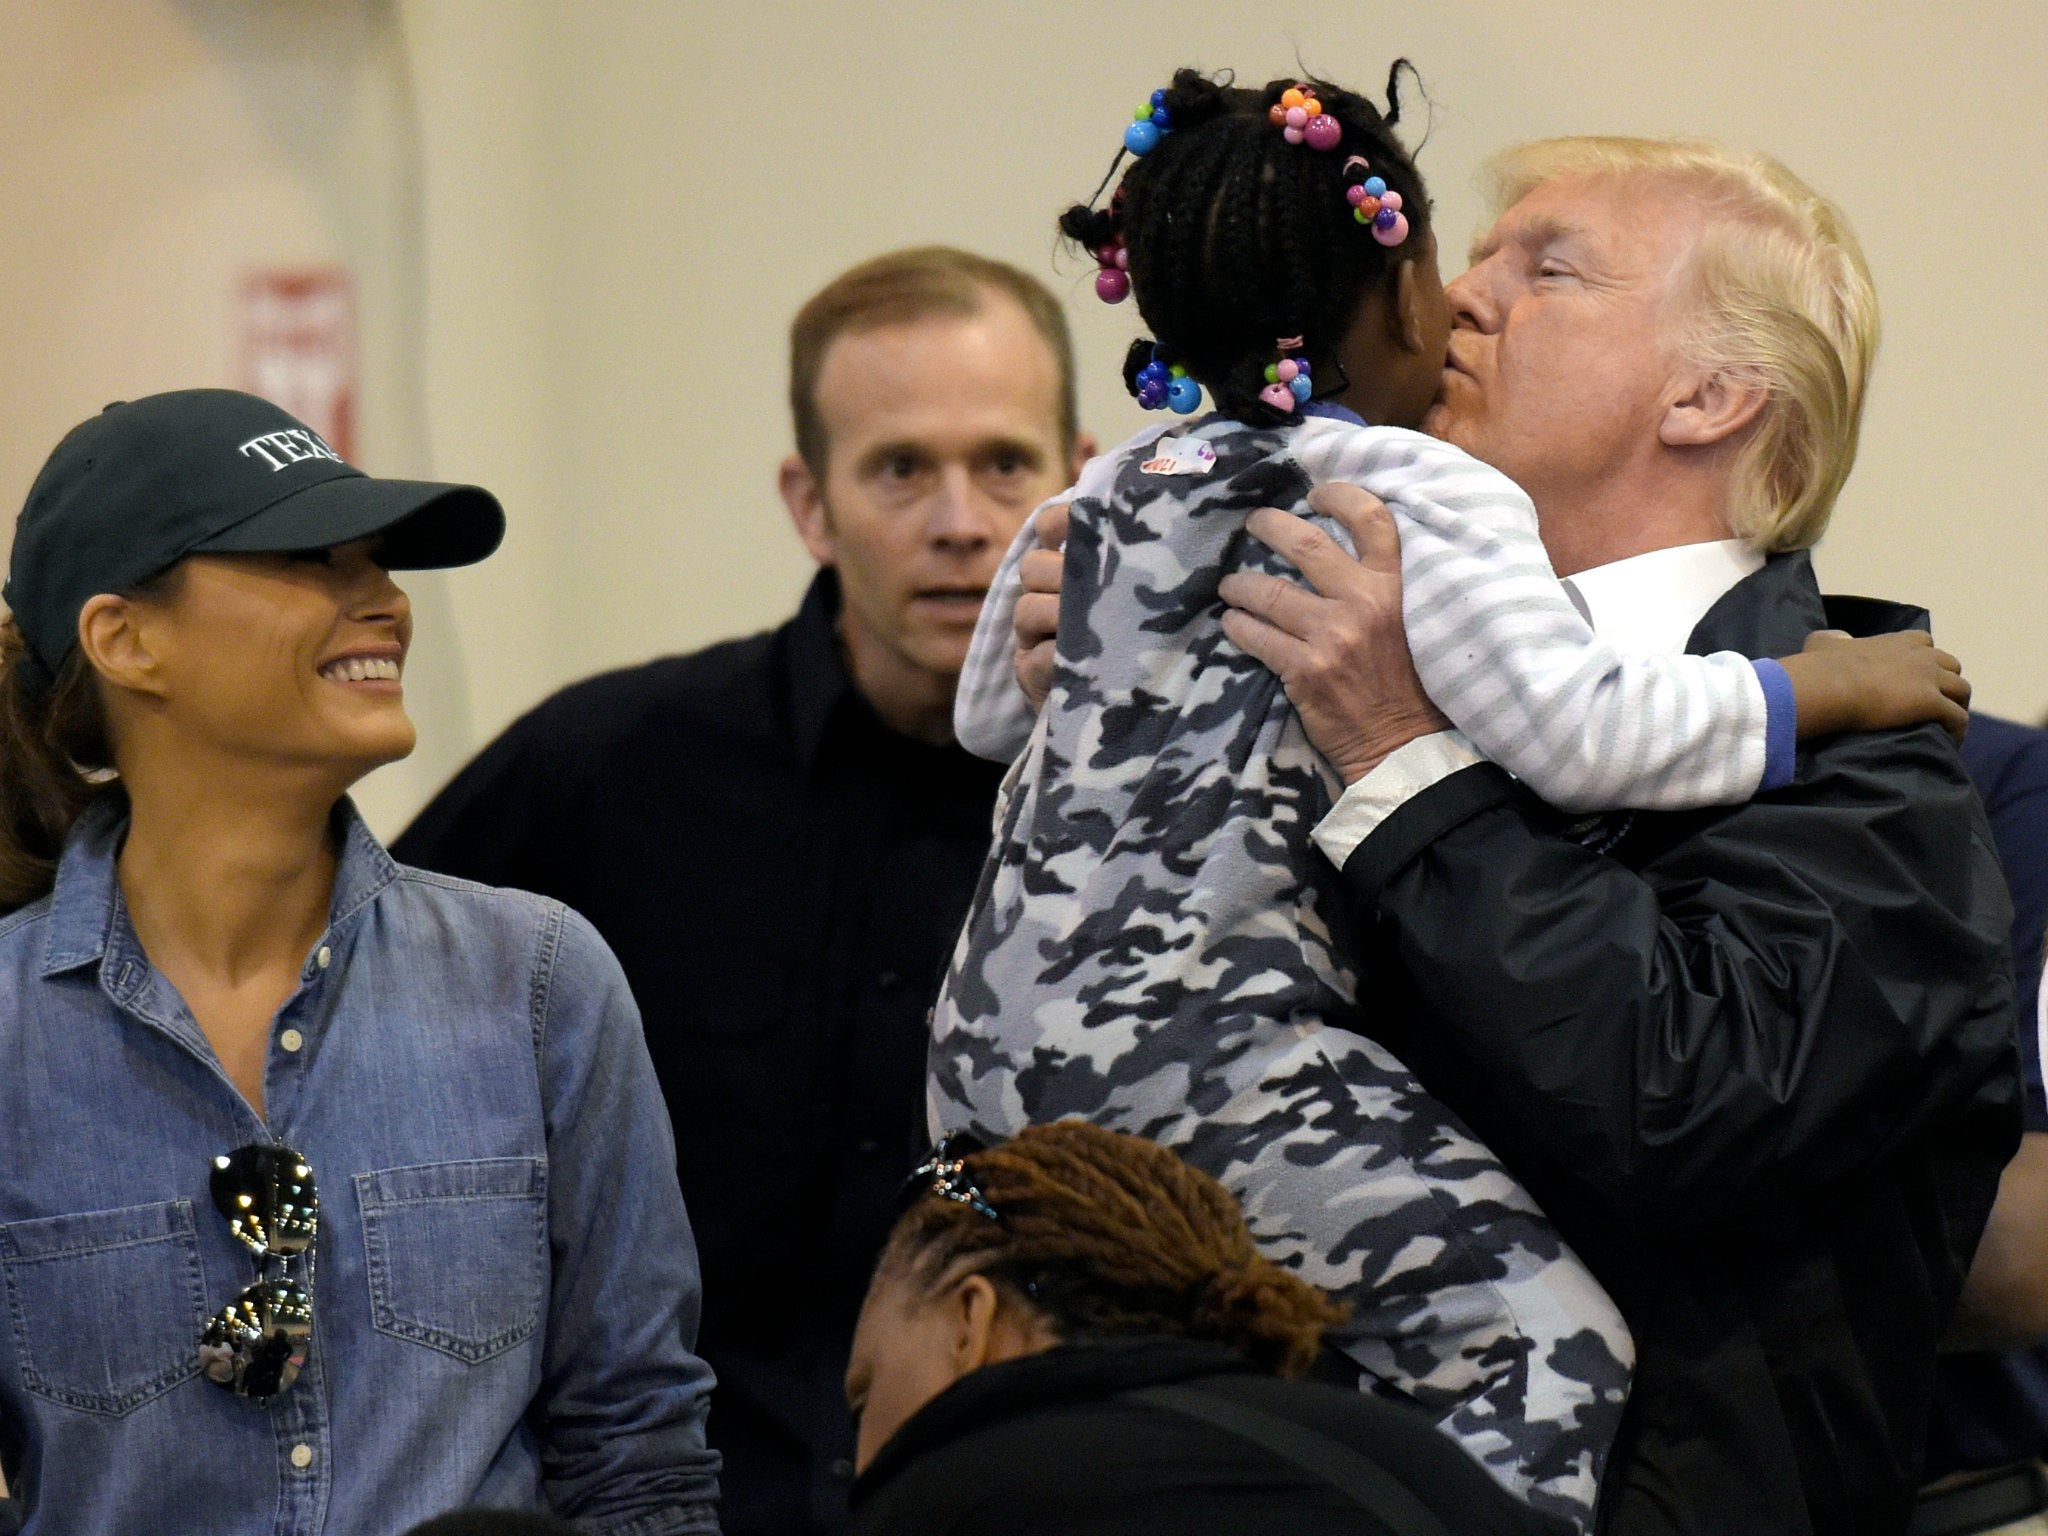 President Donald Trump and Melania Trump meet a child impacted by Hurricane Harvey during a visit to the NRG Center in Houston